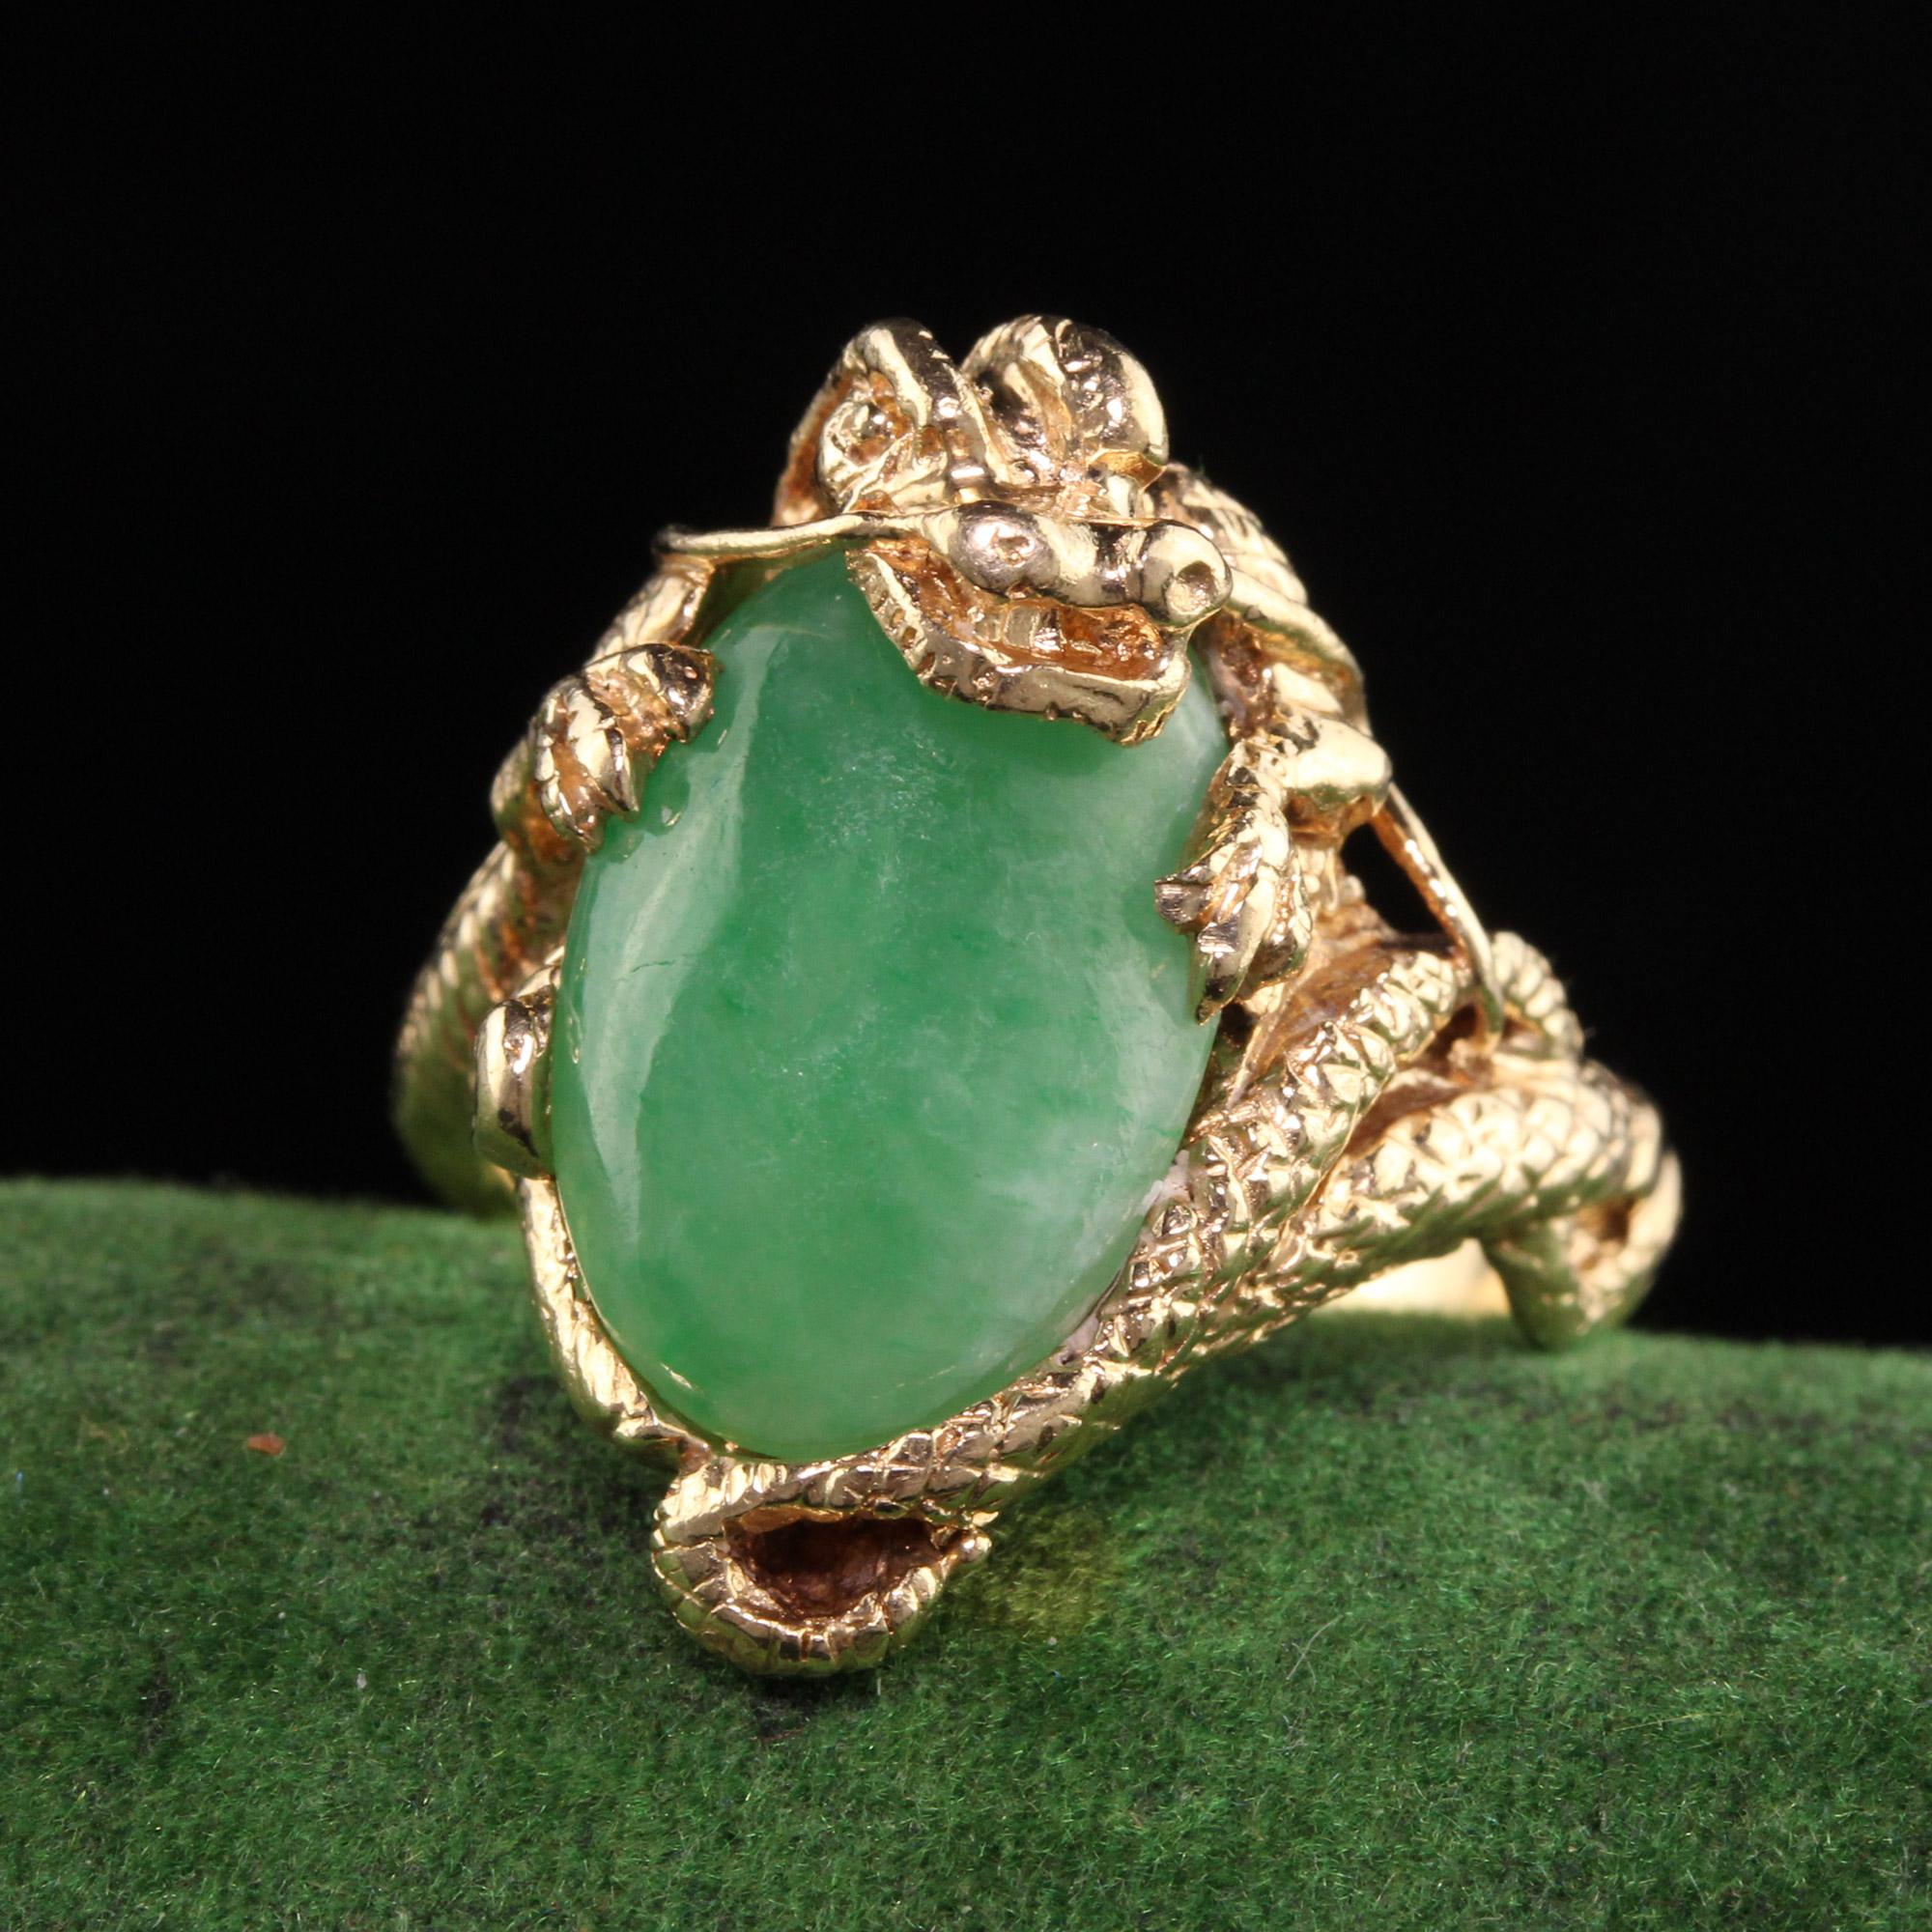 Beautiful Vintage Estate 14K Yellow Gold Cabochon Jade Dragon Ring. This beautiful vintage dragon ring features a cabochon jade in the center.

Item #R1067

Metal: 14K Yellow Gold

Weight: 9 Grams

Size: 6 1/2

Jade: Approximately 5